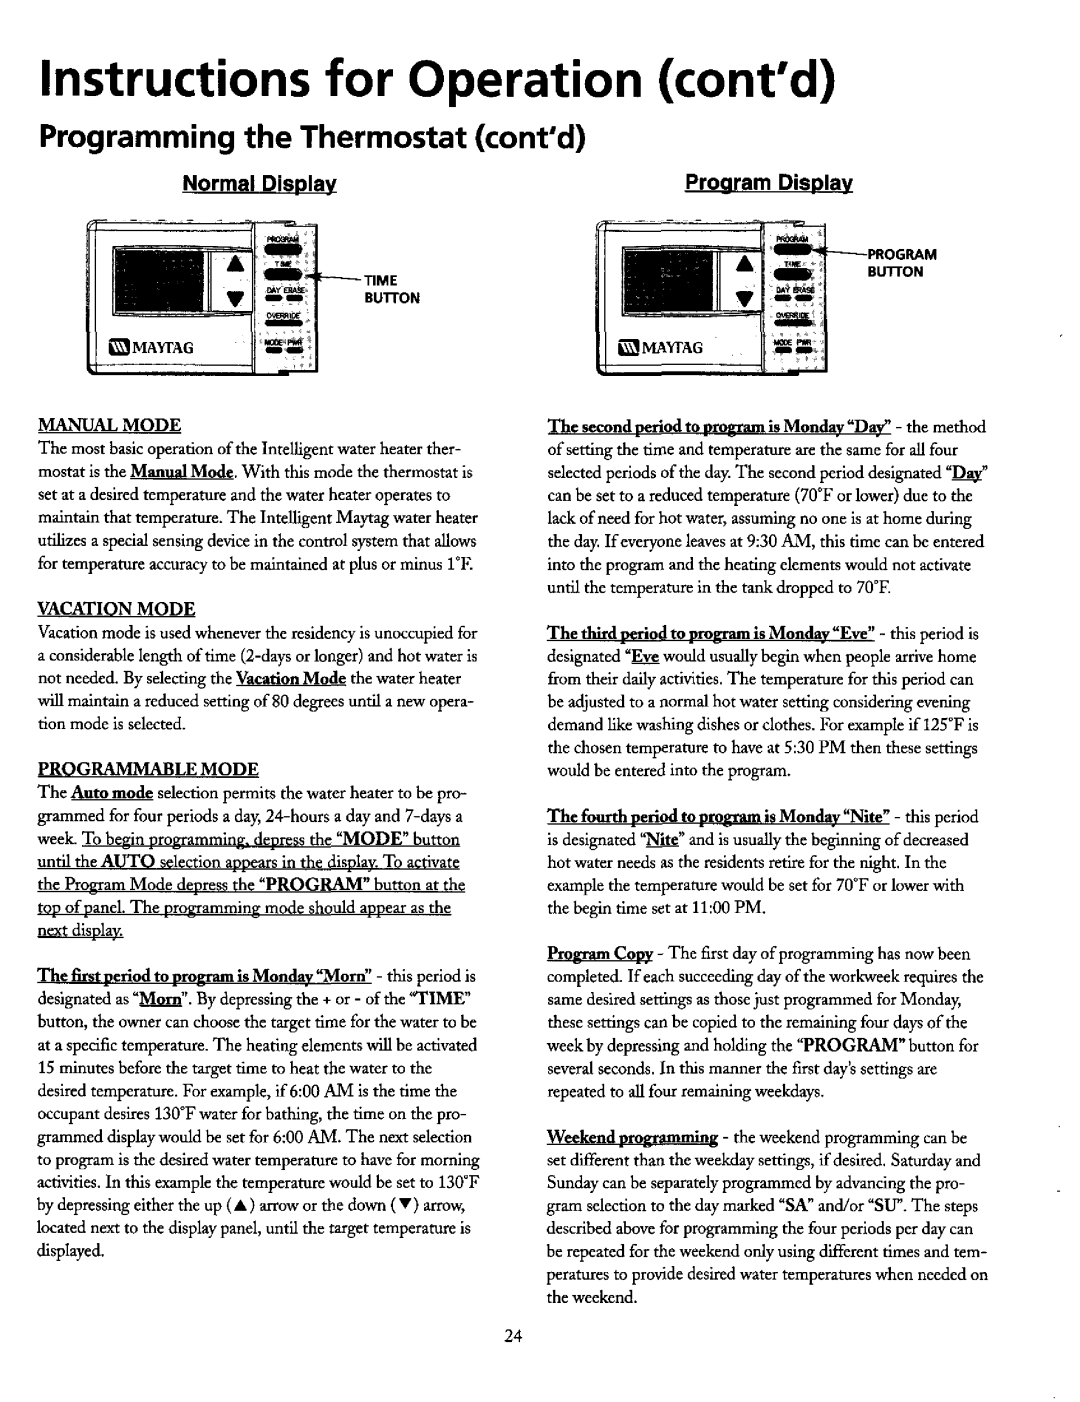 Maytag HE21250PC, HE21282PC operating instructions Instructions for Operation contd, Programming the Thermostat contd 